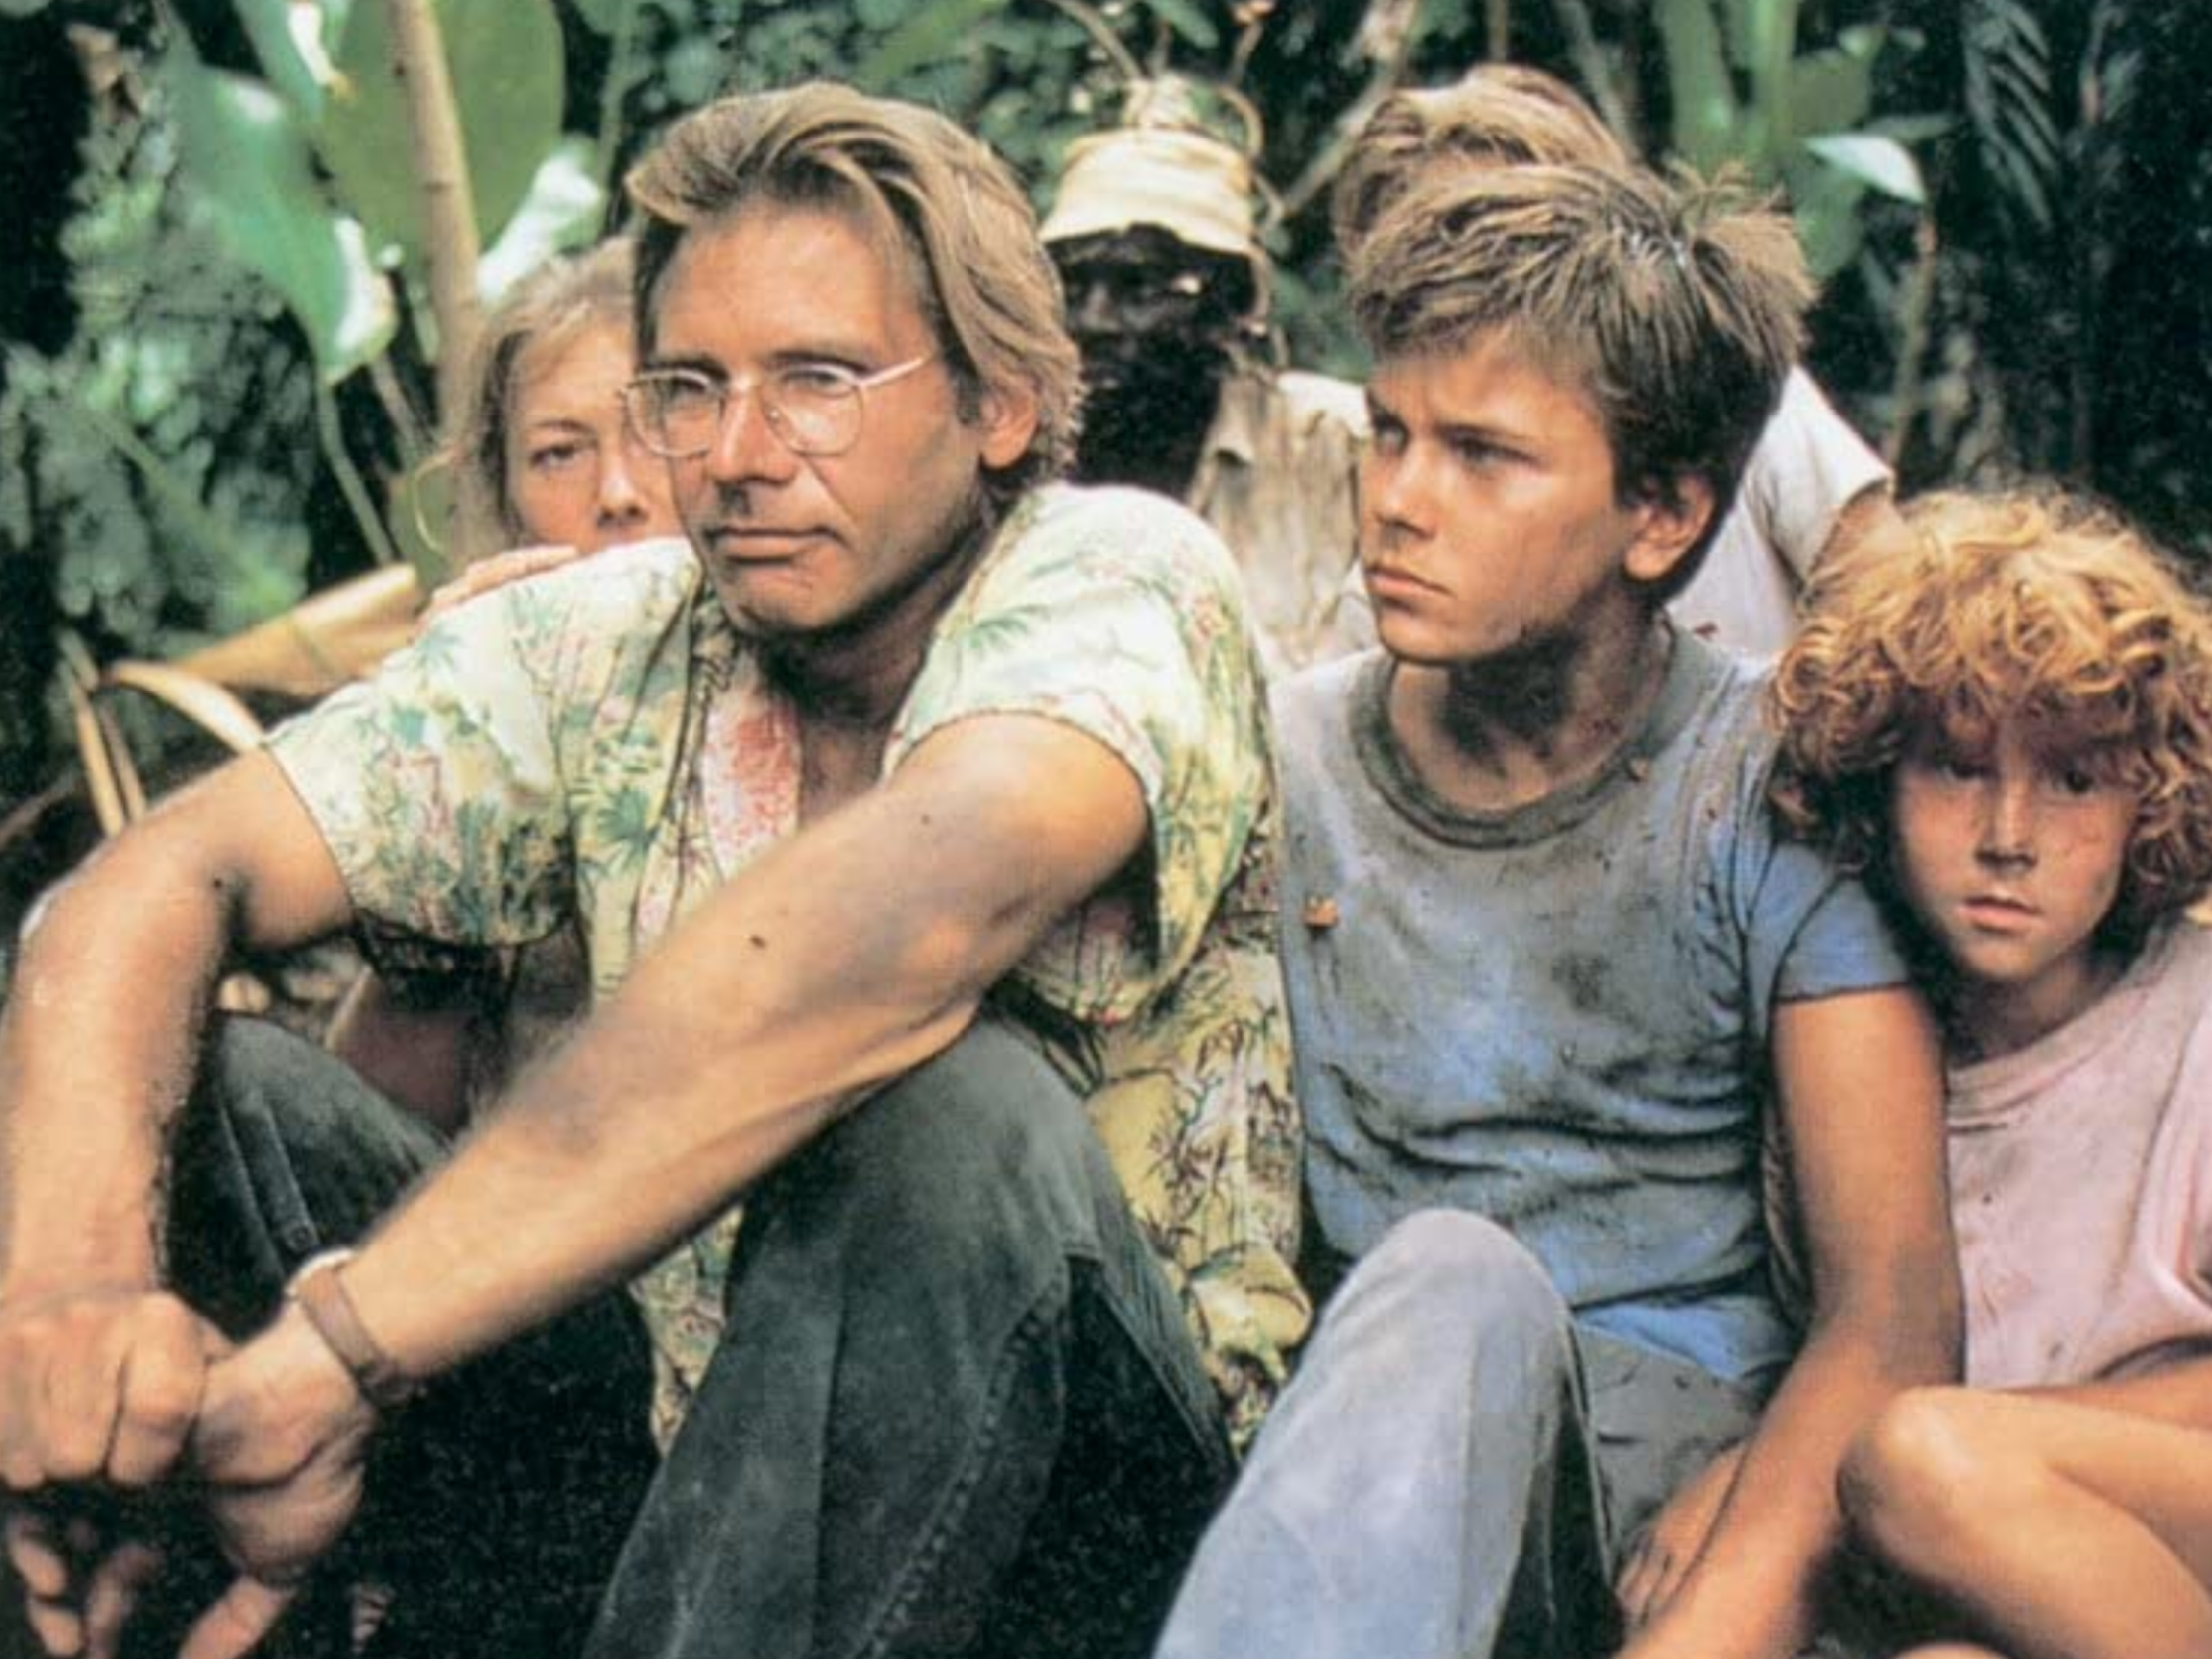 Helen Mirren, Harrison Ford and River Phoenix in “The Mosquito Coast” (1986)